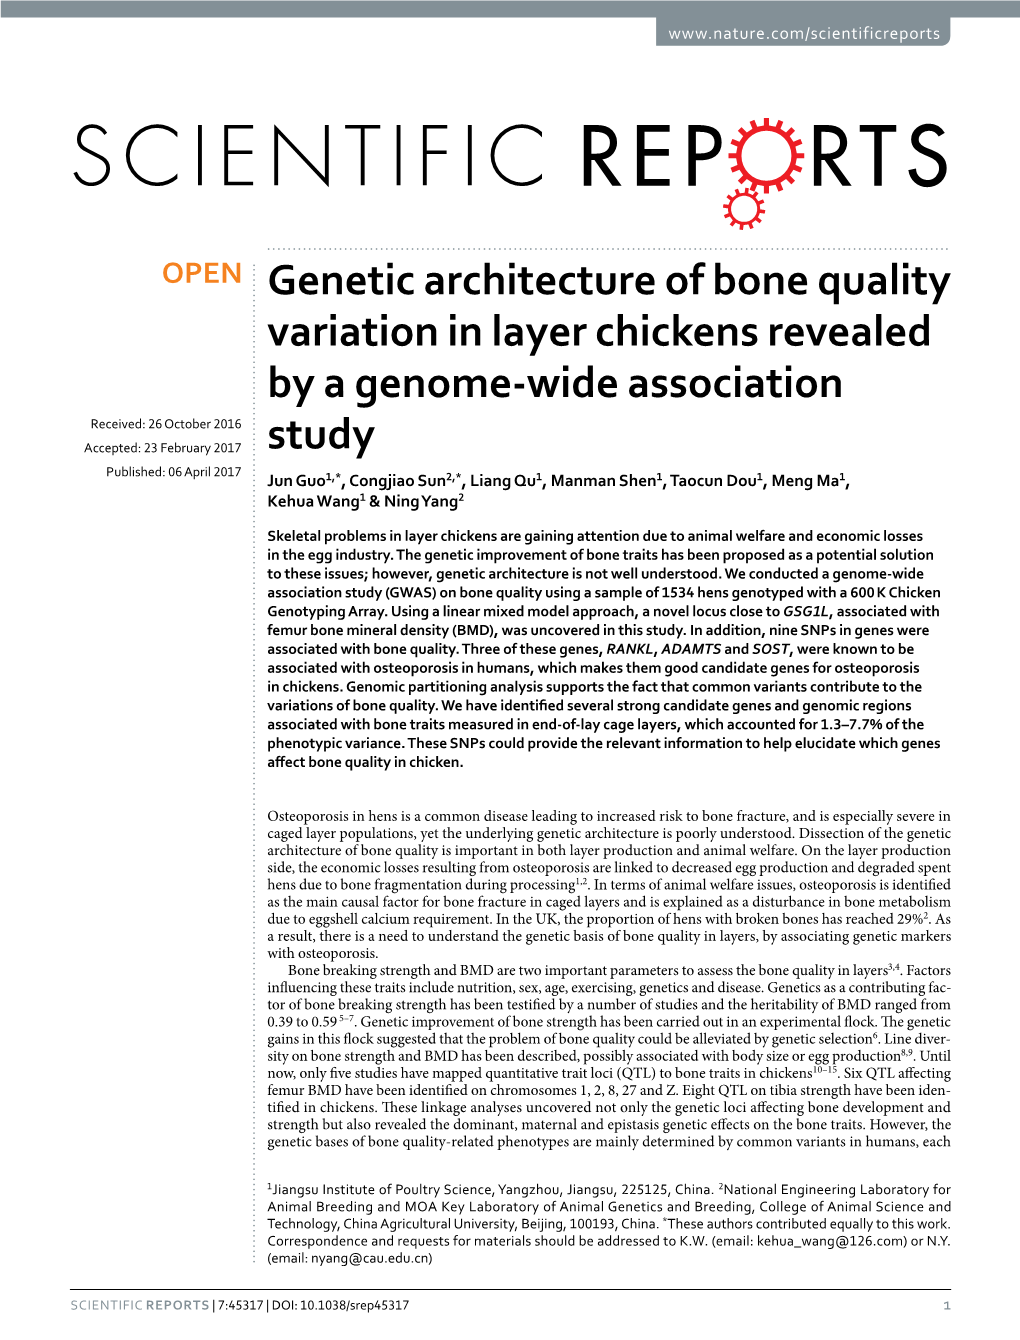 Genetic Architecture of Bone Quality Variation in Layer Chickens Revealed